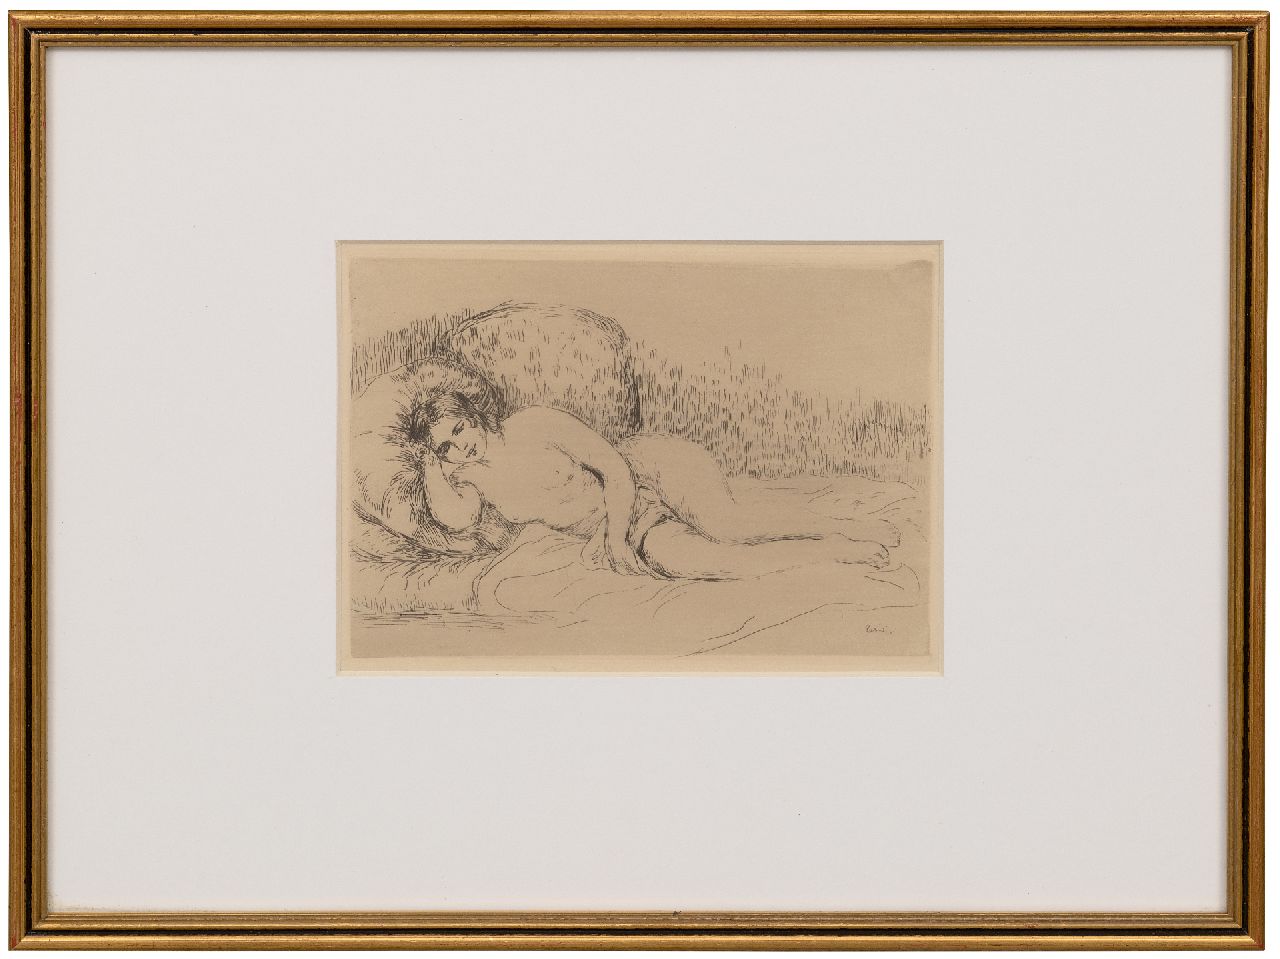 Renoir P.A.  | Pierre 'Auguste' Renoir, Femme nue couchée, etching 13.4 x 19.4 cm, signed l.r. (in the plate) and executed in 1906